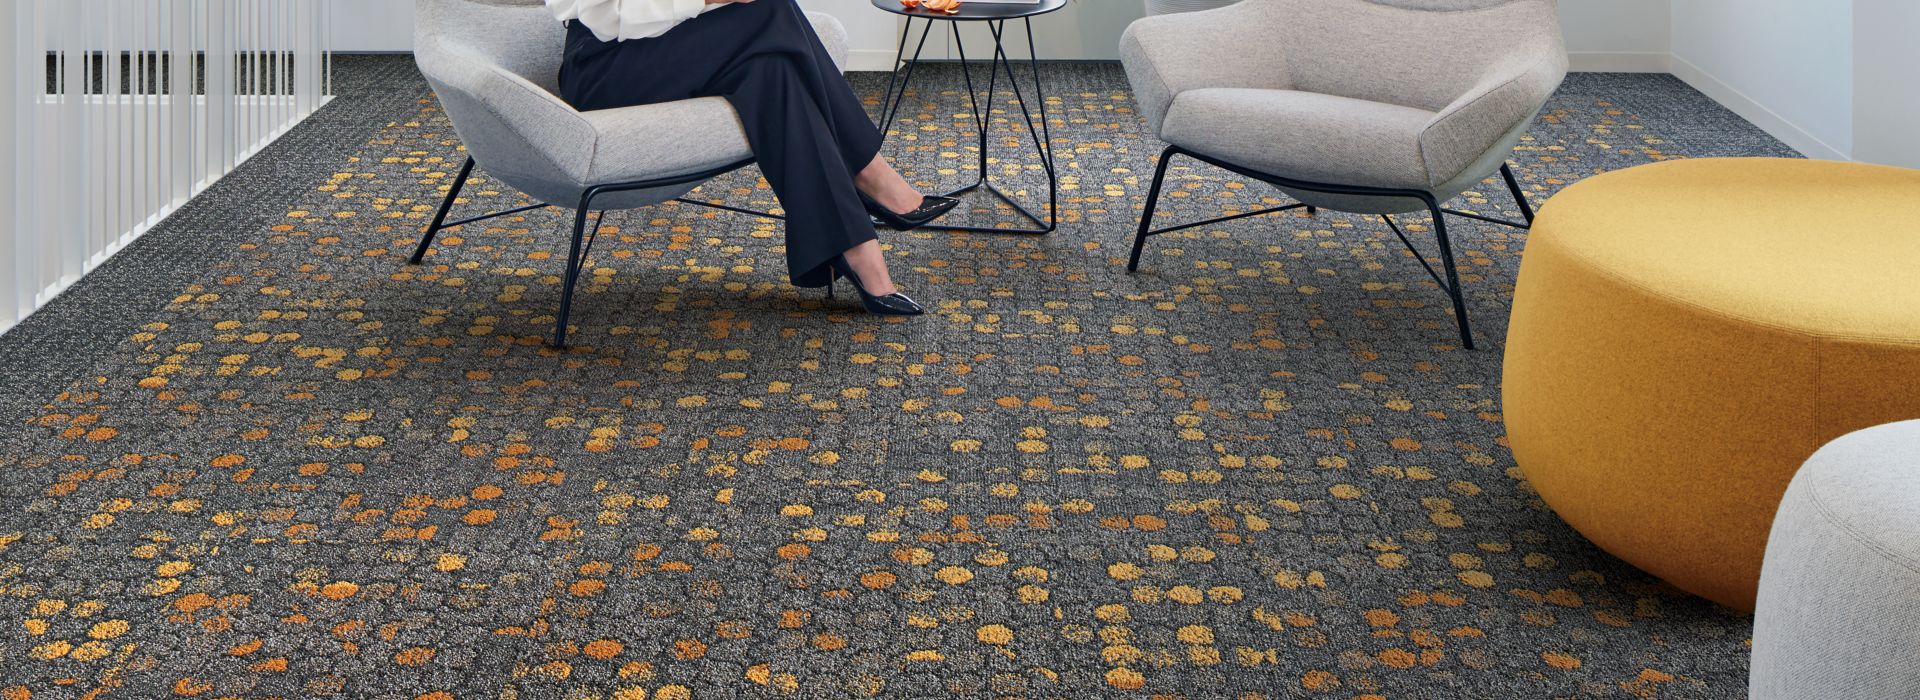 Interface Broome Street and Wheler Street carpet tile in lobby area with woman seated imagen número 1